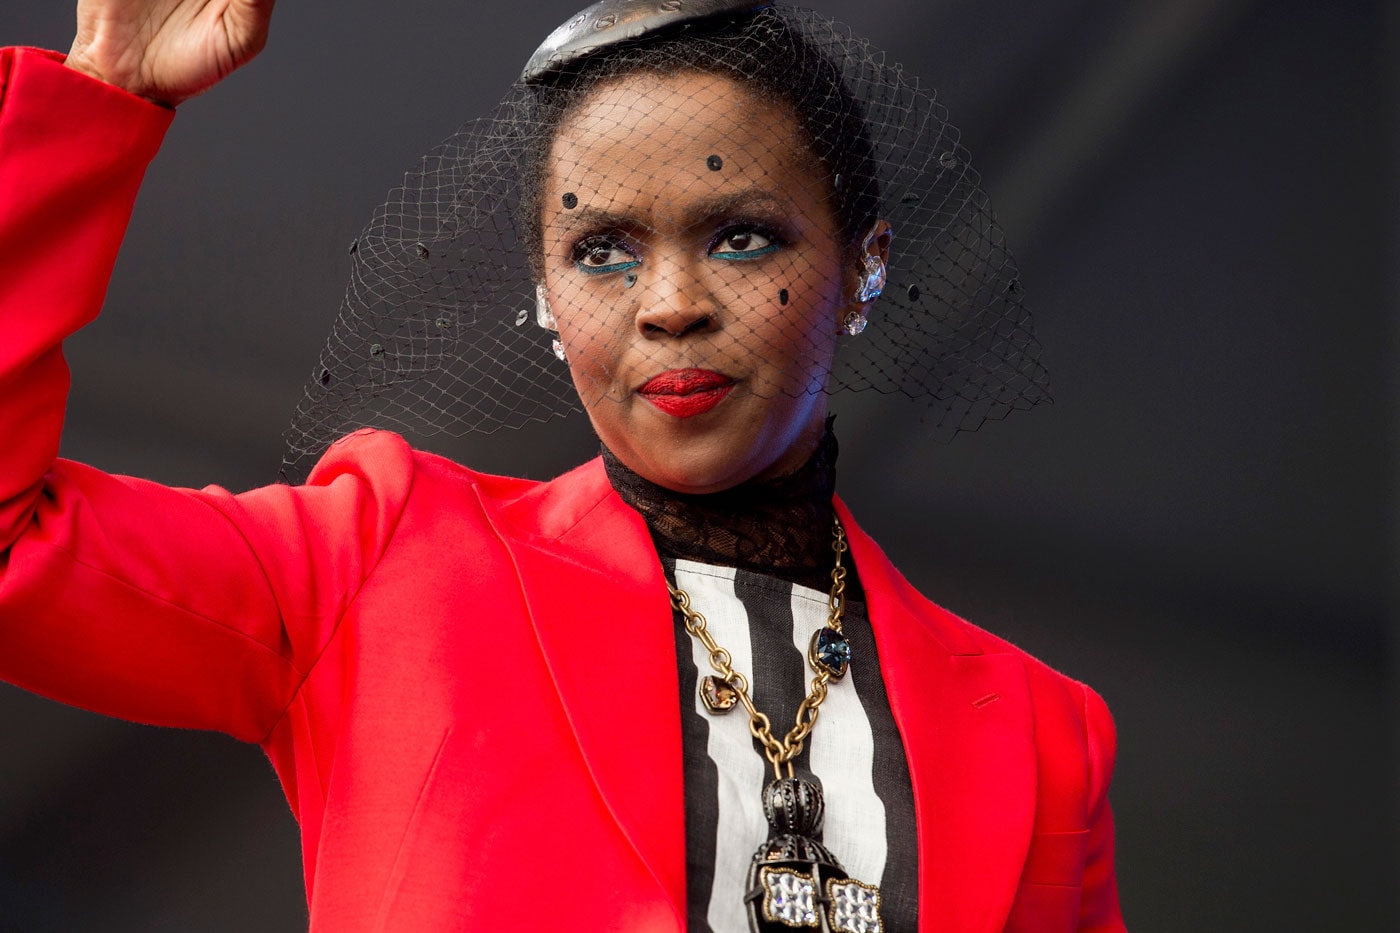 Lauryn Hill Performs "Doo Wop (That Thing)" & "Mystery of Iniquity" for 'Austin City Limits' & Announces New Tour